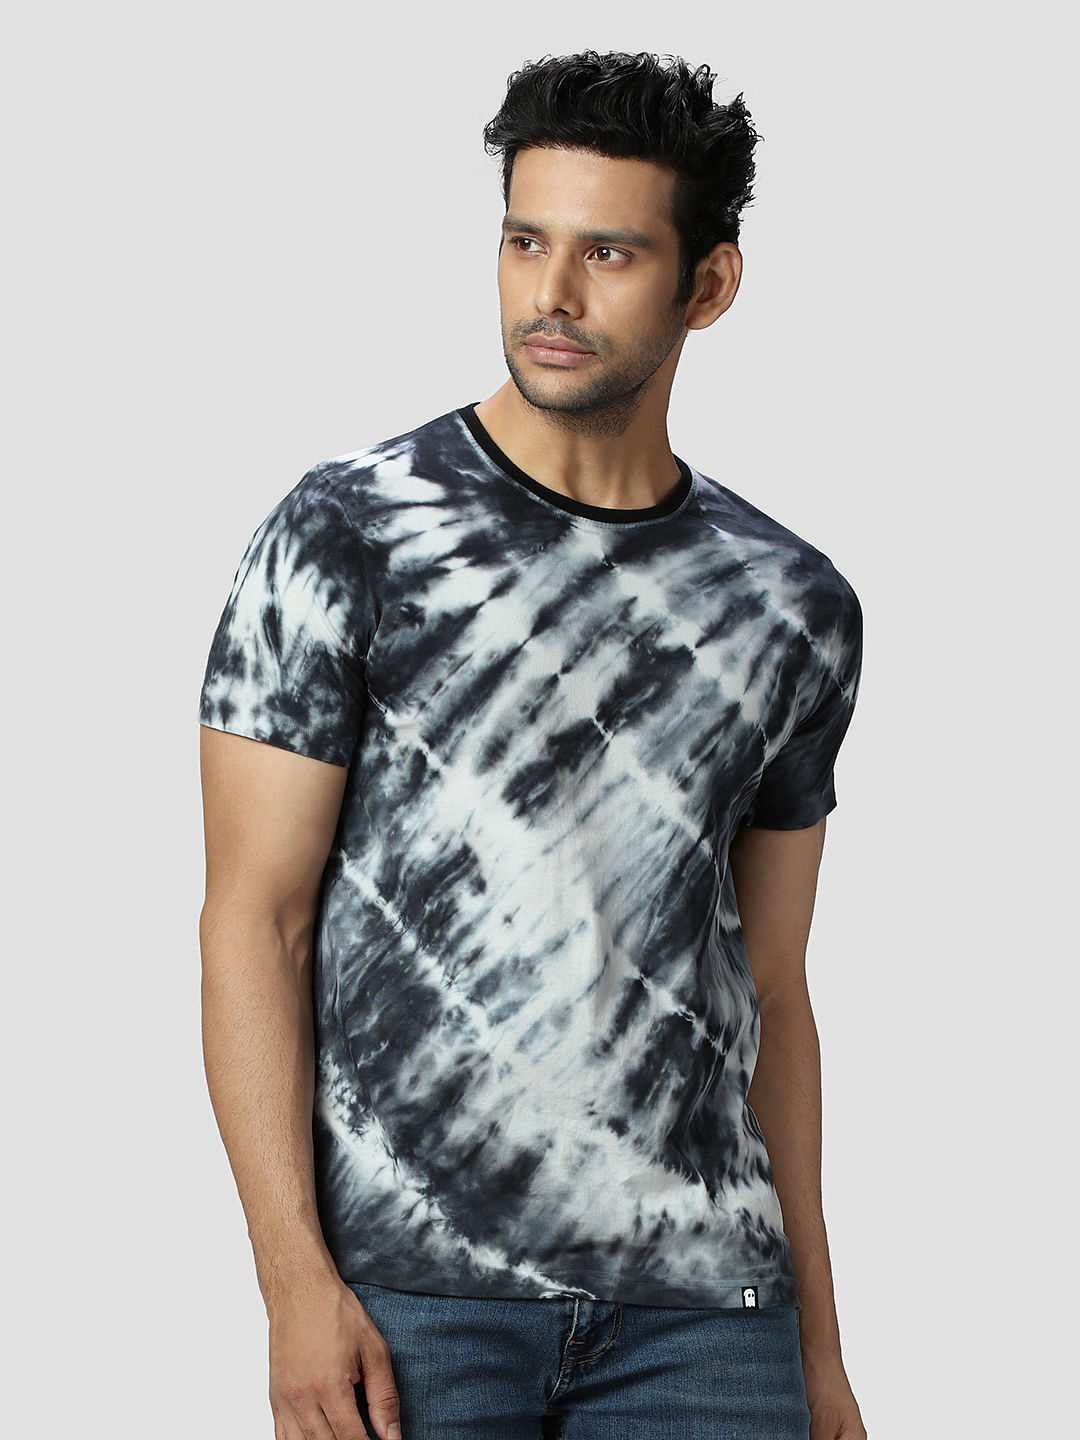 Buy Tie Dye (Diagonal Grey) T-Shirts online at The Souled Store.